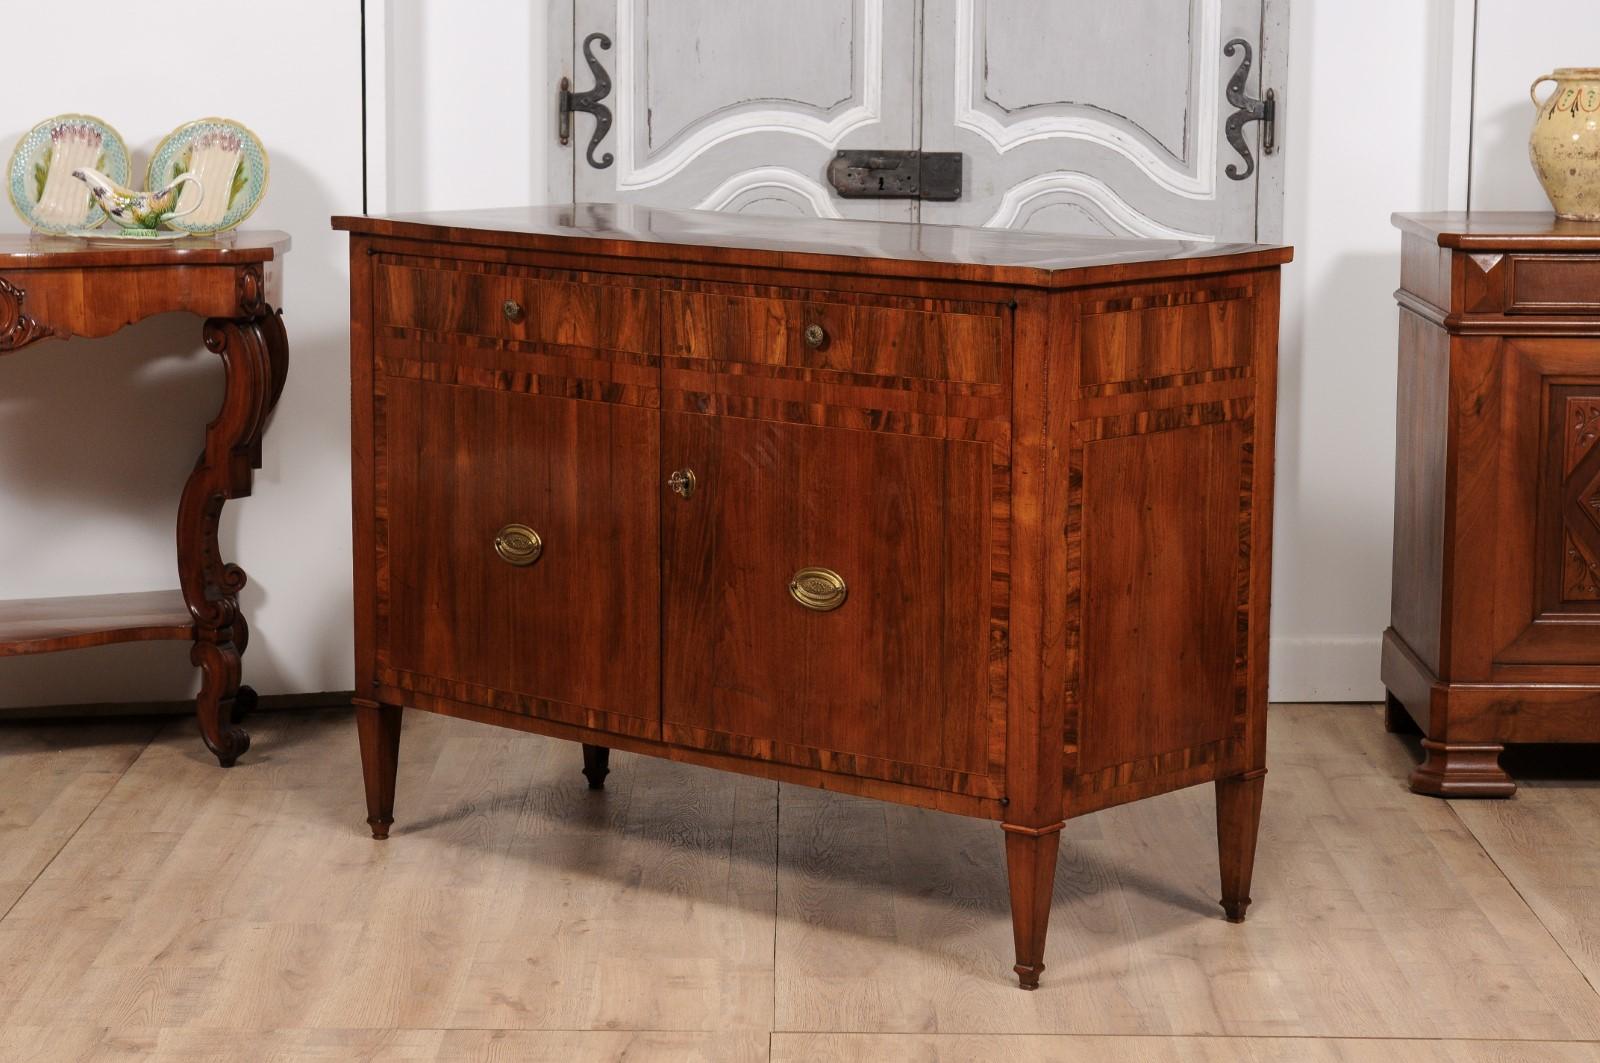 Italian 1780s Walnut and Mahogany Buffet with Cross Banding and Tapered Legs For Sale 5